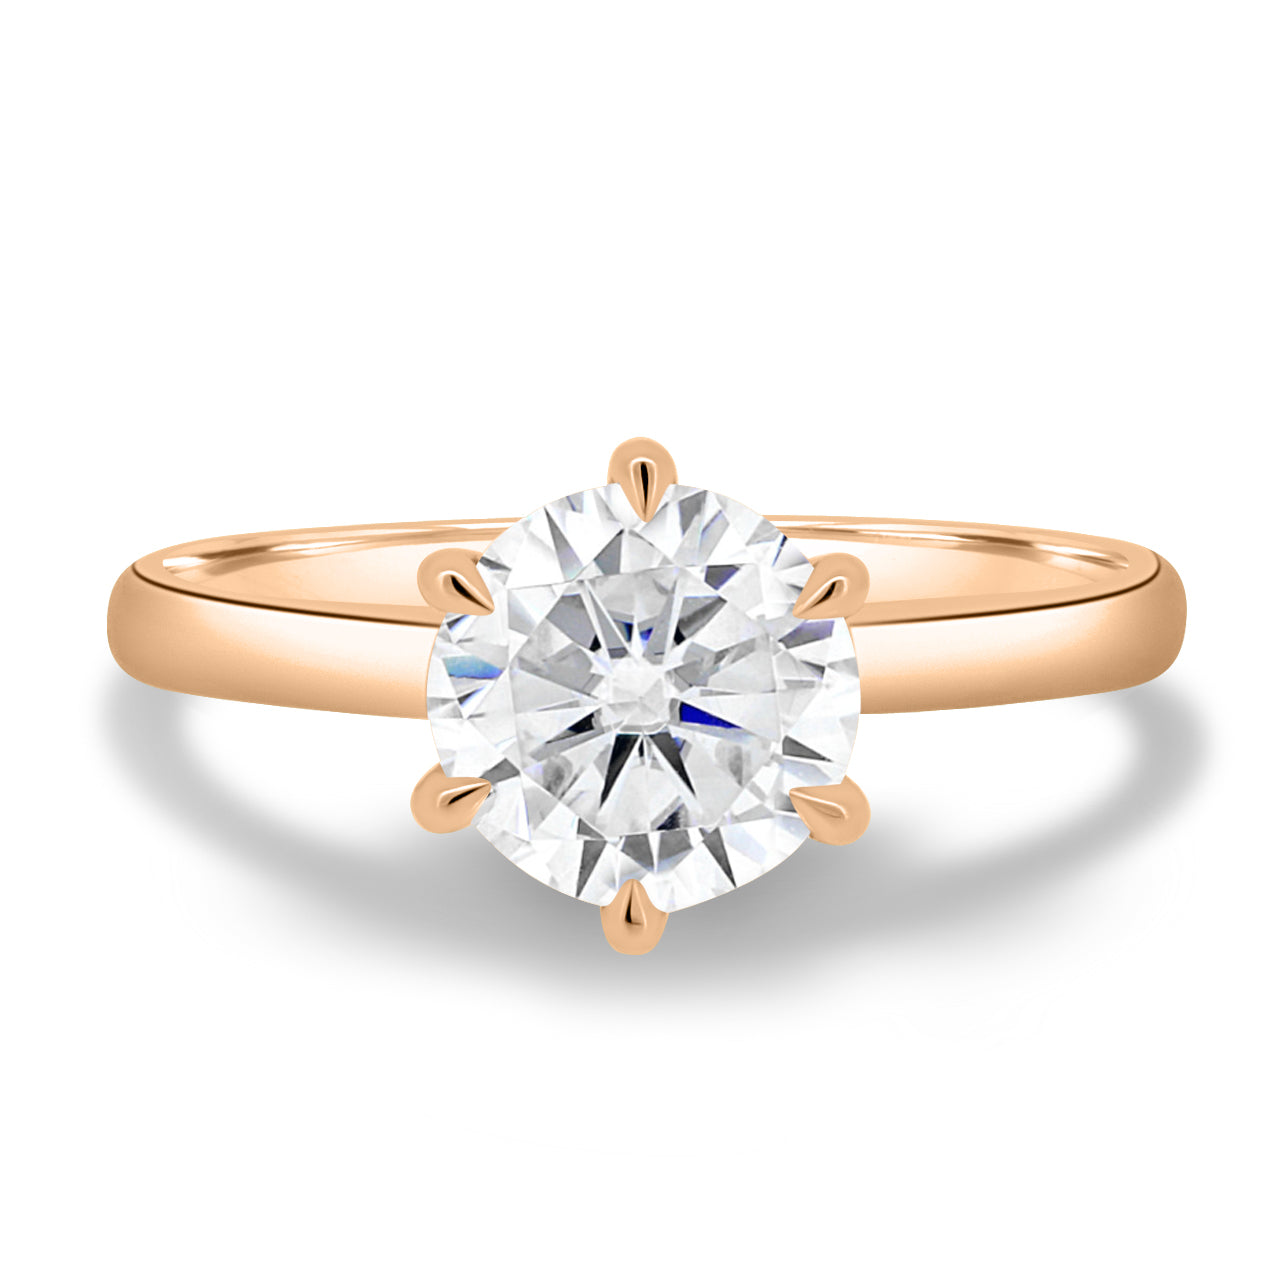 1.83 CT Round Solitaire CVD G/VS2 Diamond Engagement Ring 10